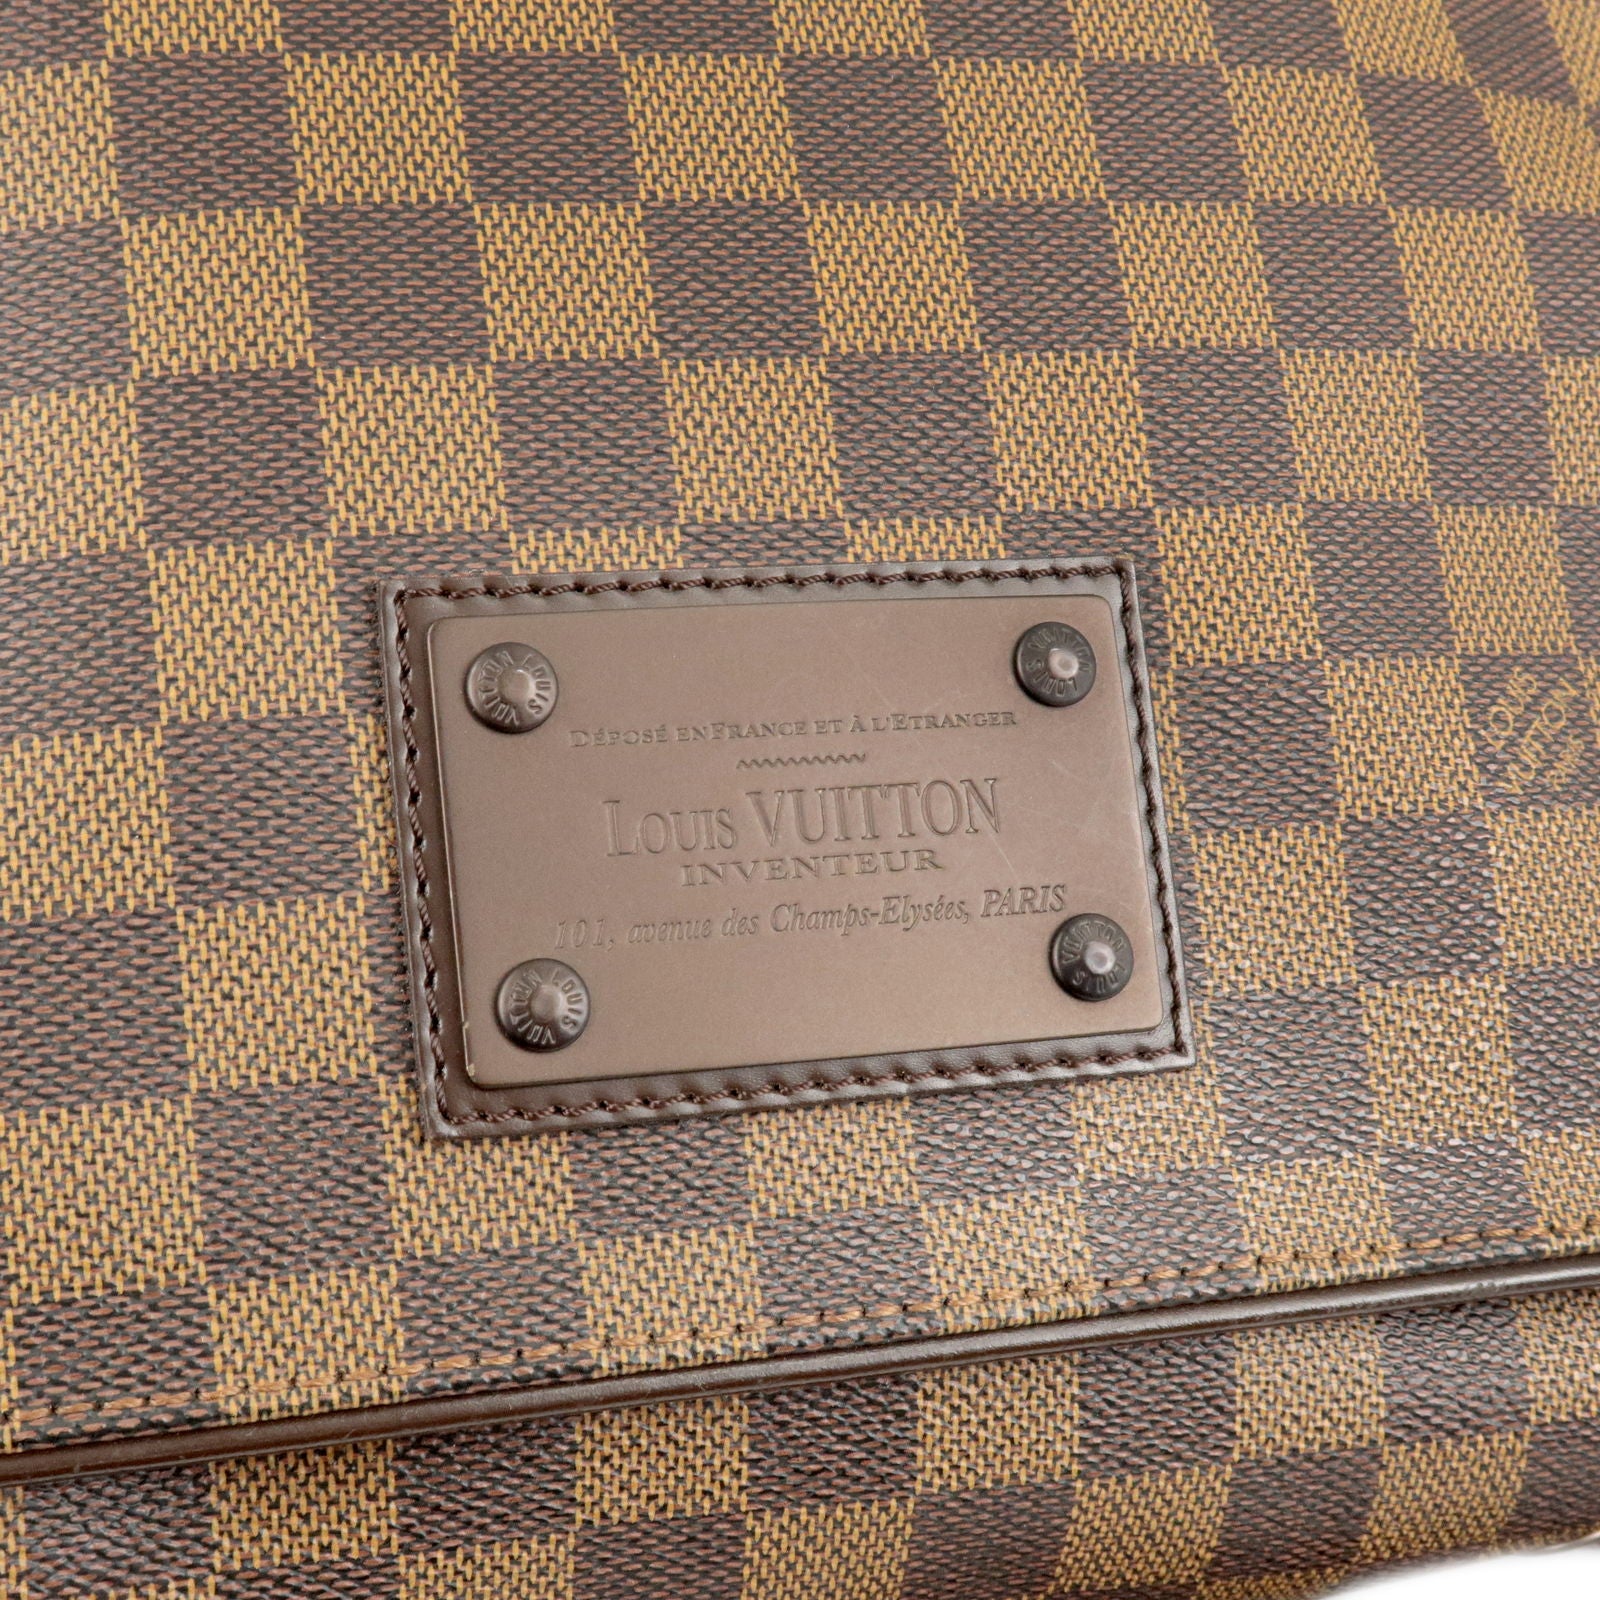 Louis Vuitton Brooklyn MM Damier Ebene Canvas - Used Authentic Bag